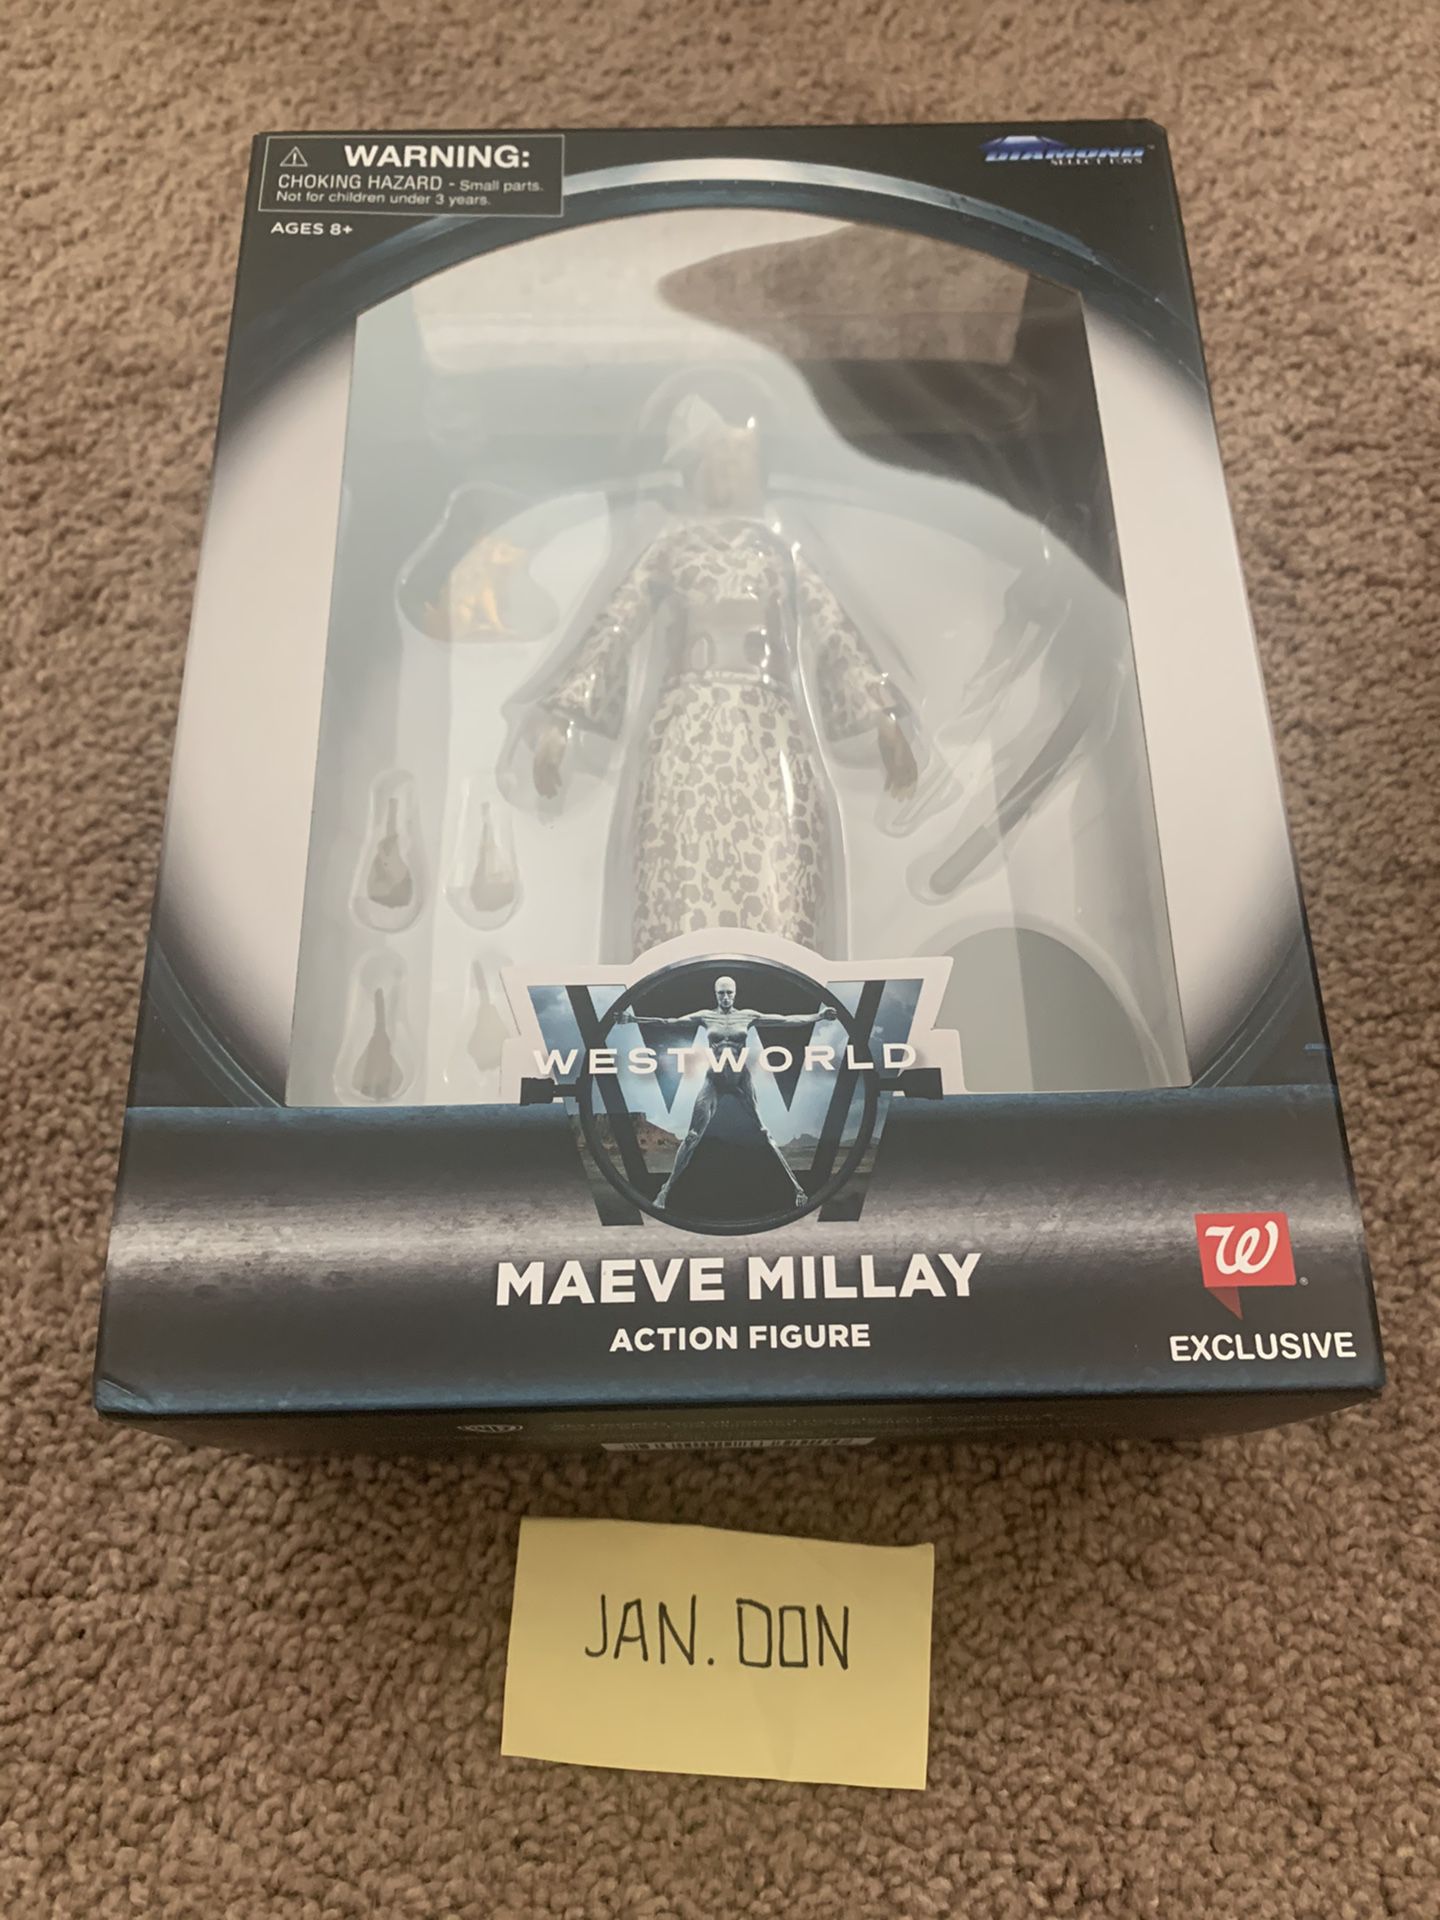 WESTWORLD: Maeve Millay action figure - Walgreens exclusive. Limited